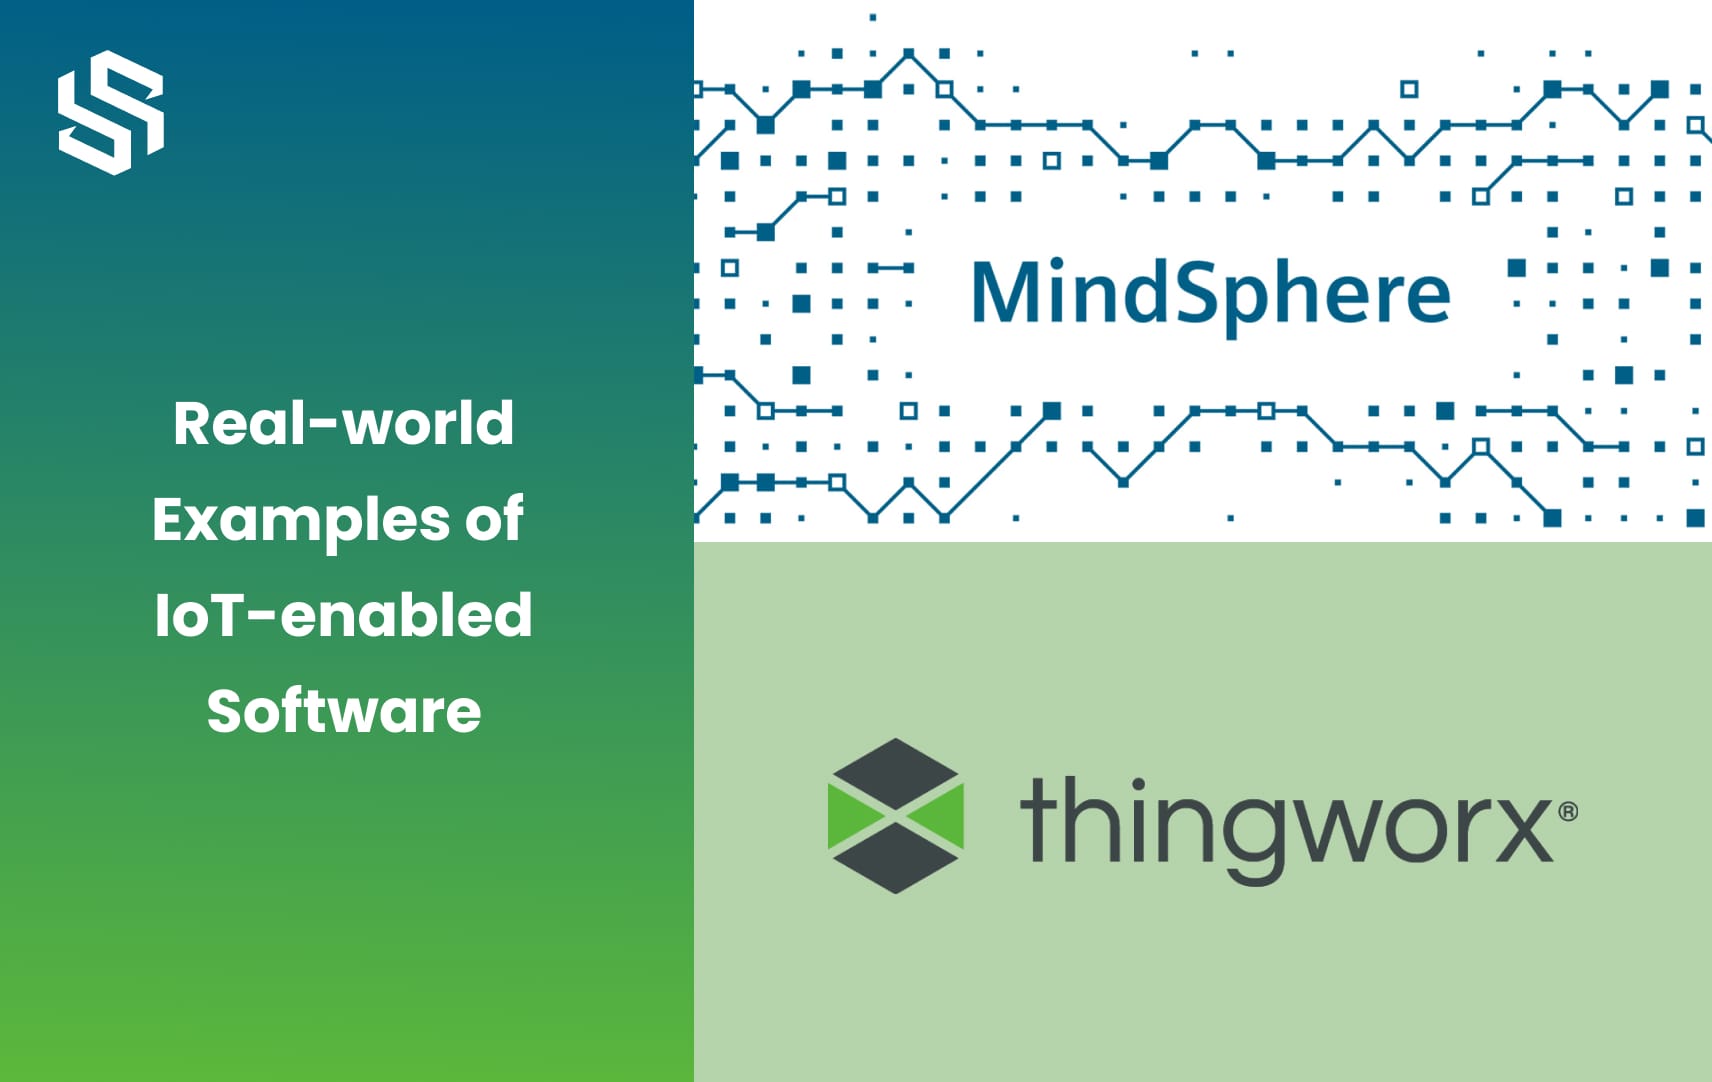 Real-world Examples of IoT-enabled Software